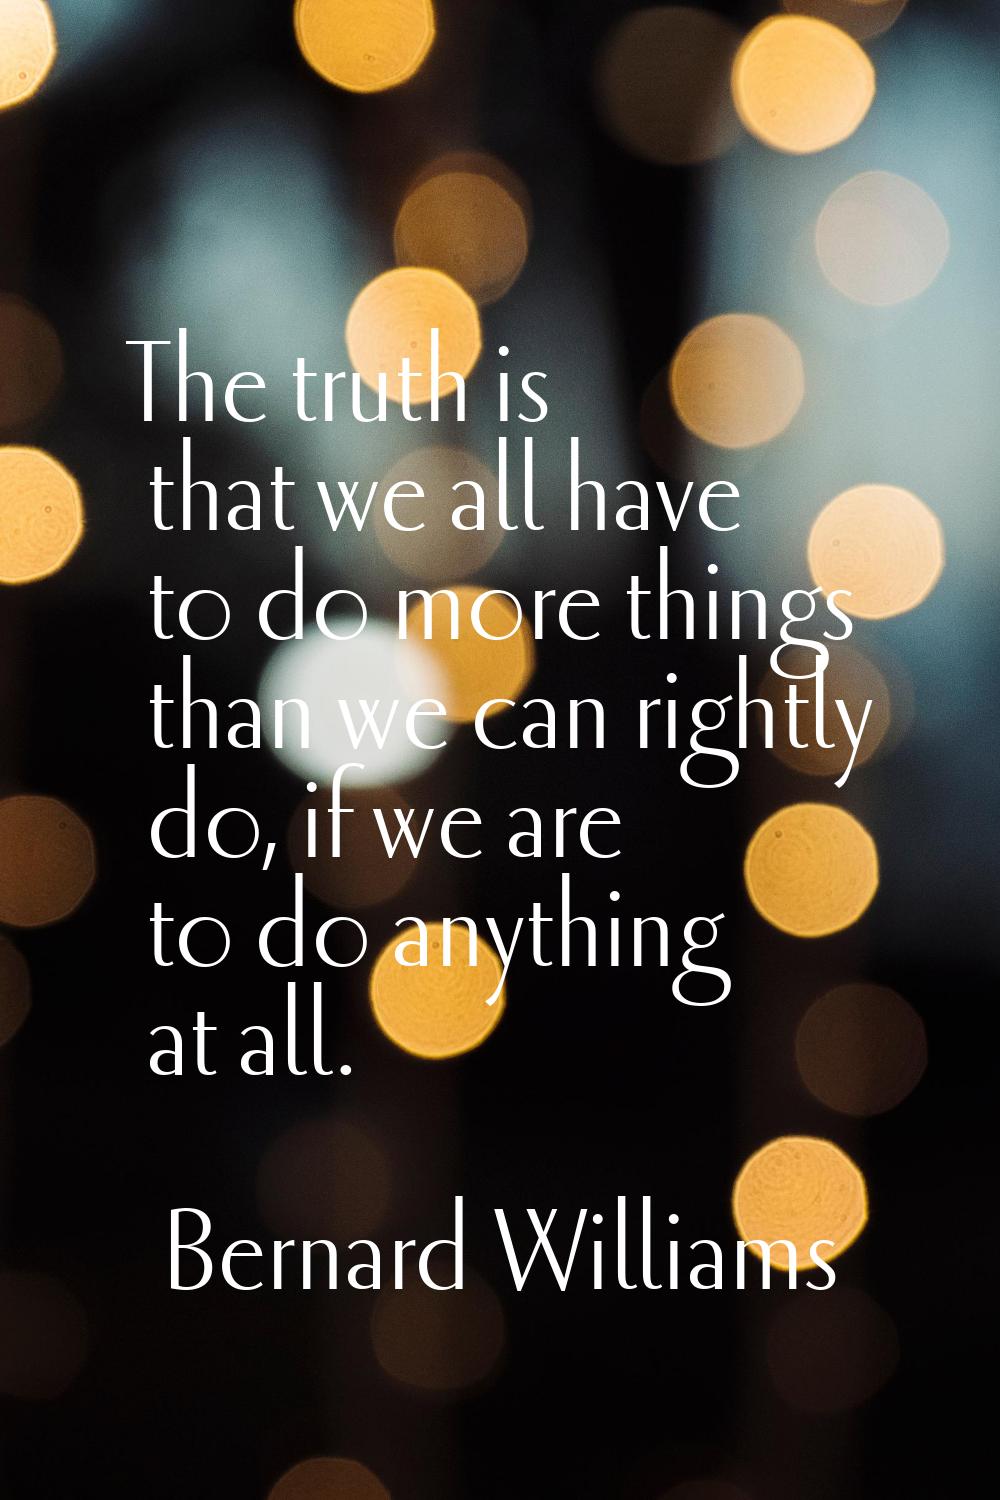 The truth is that we all have to do more things than we can rightly do, if we are to do anything at